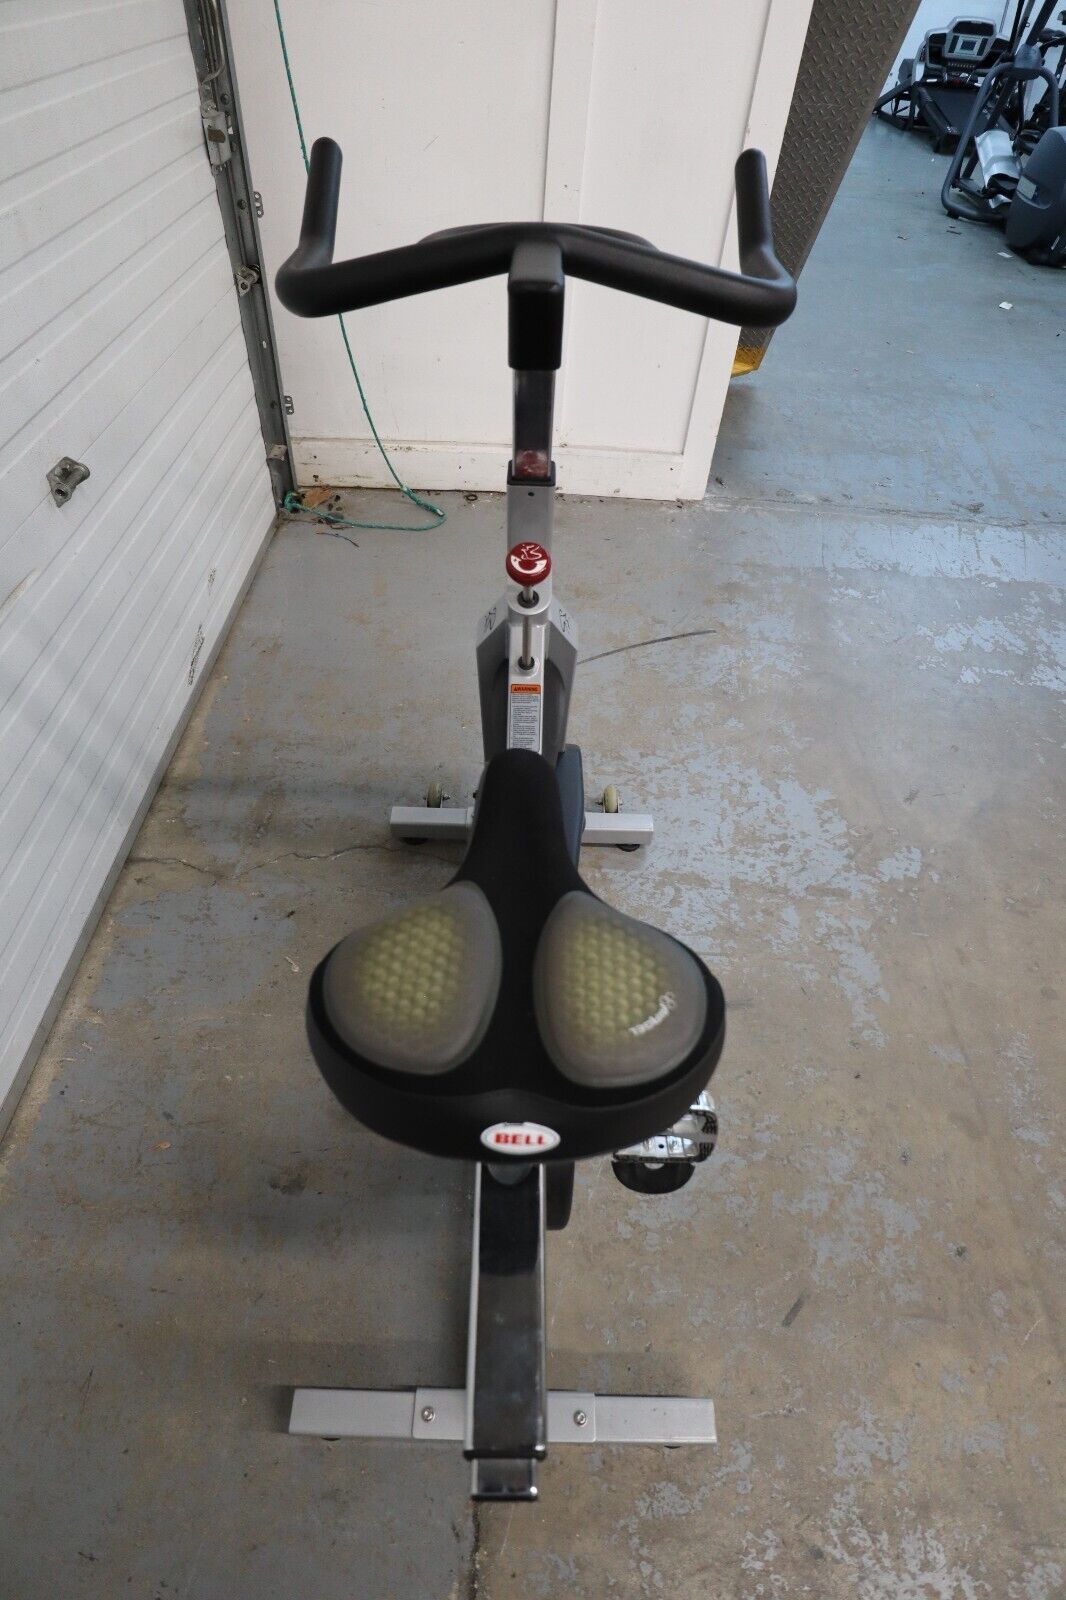 Used Star Trac Spinner Indoor Spin Cycle Velo SBVN09 Stationary Bike S